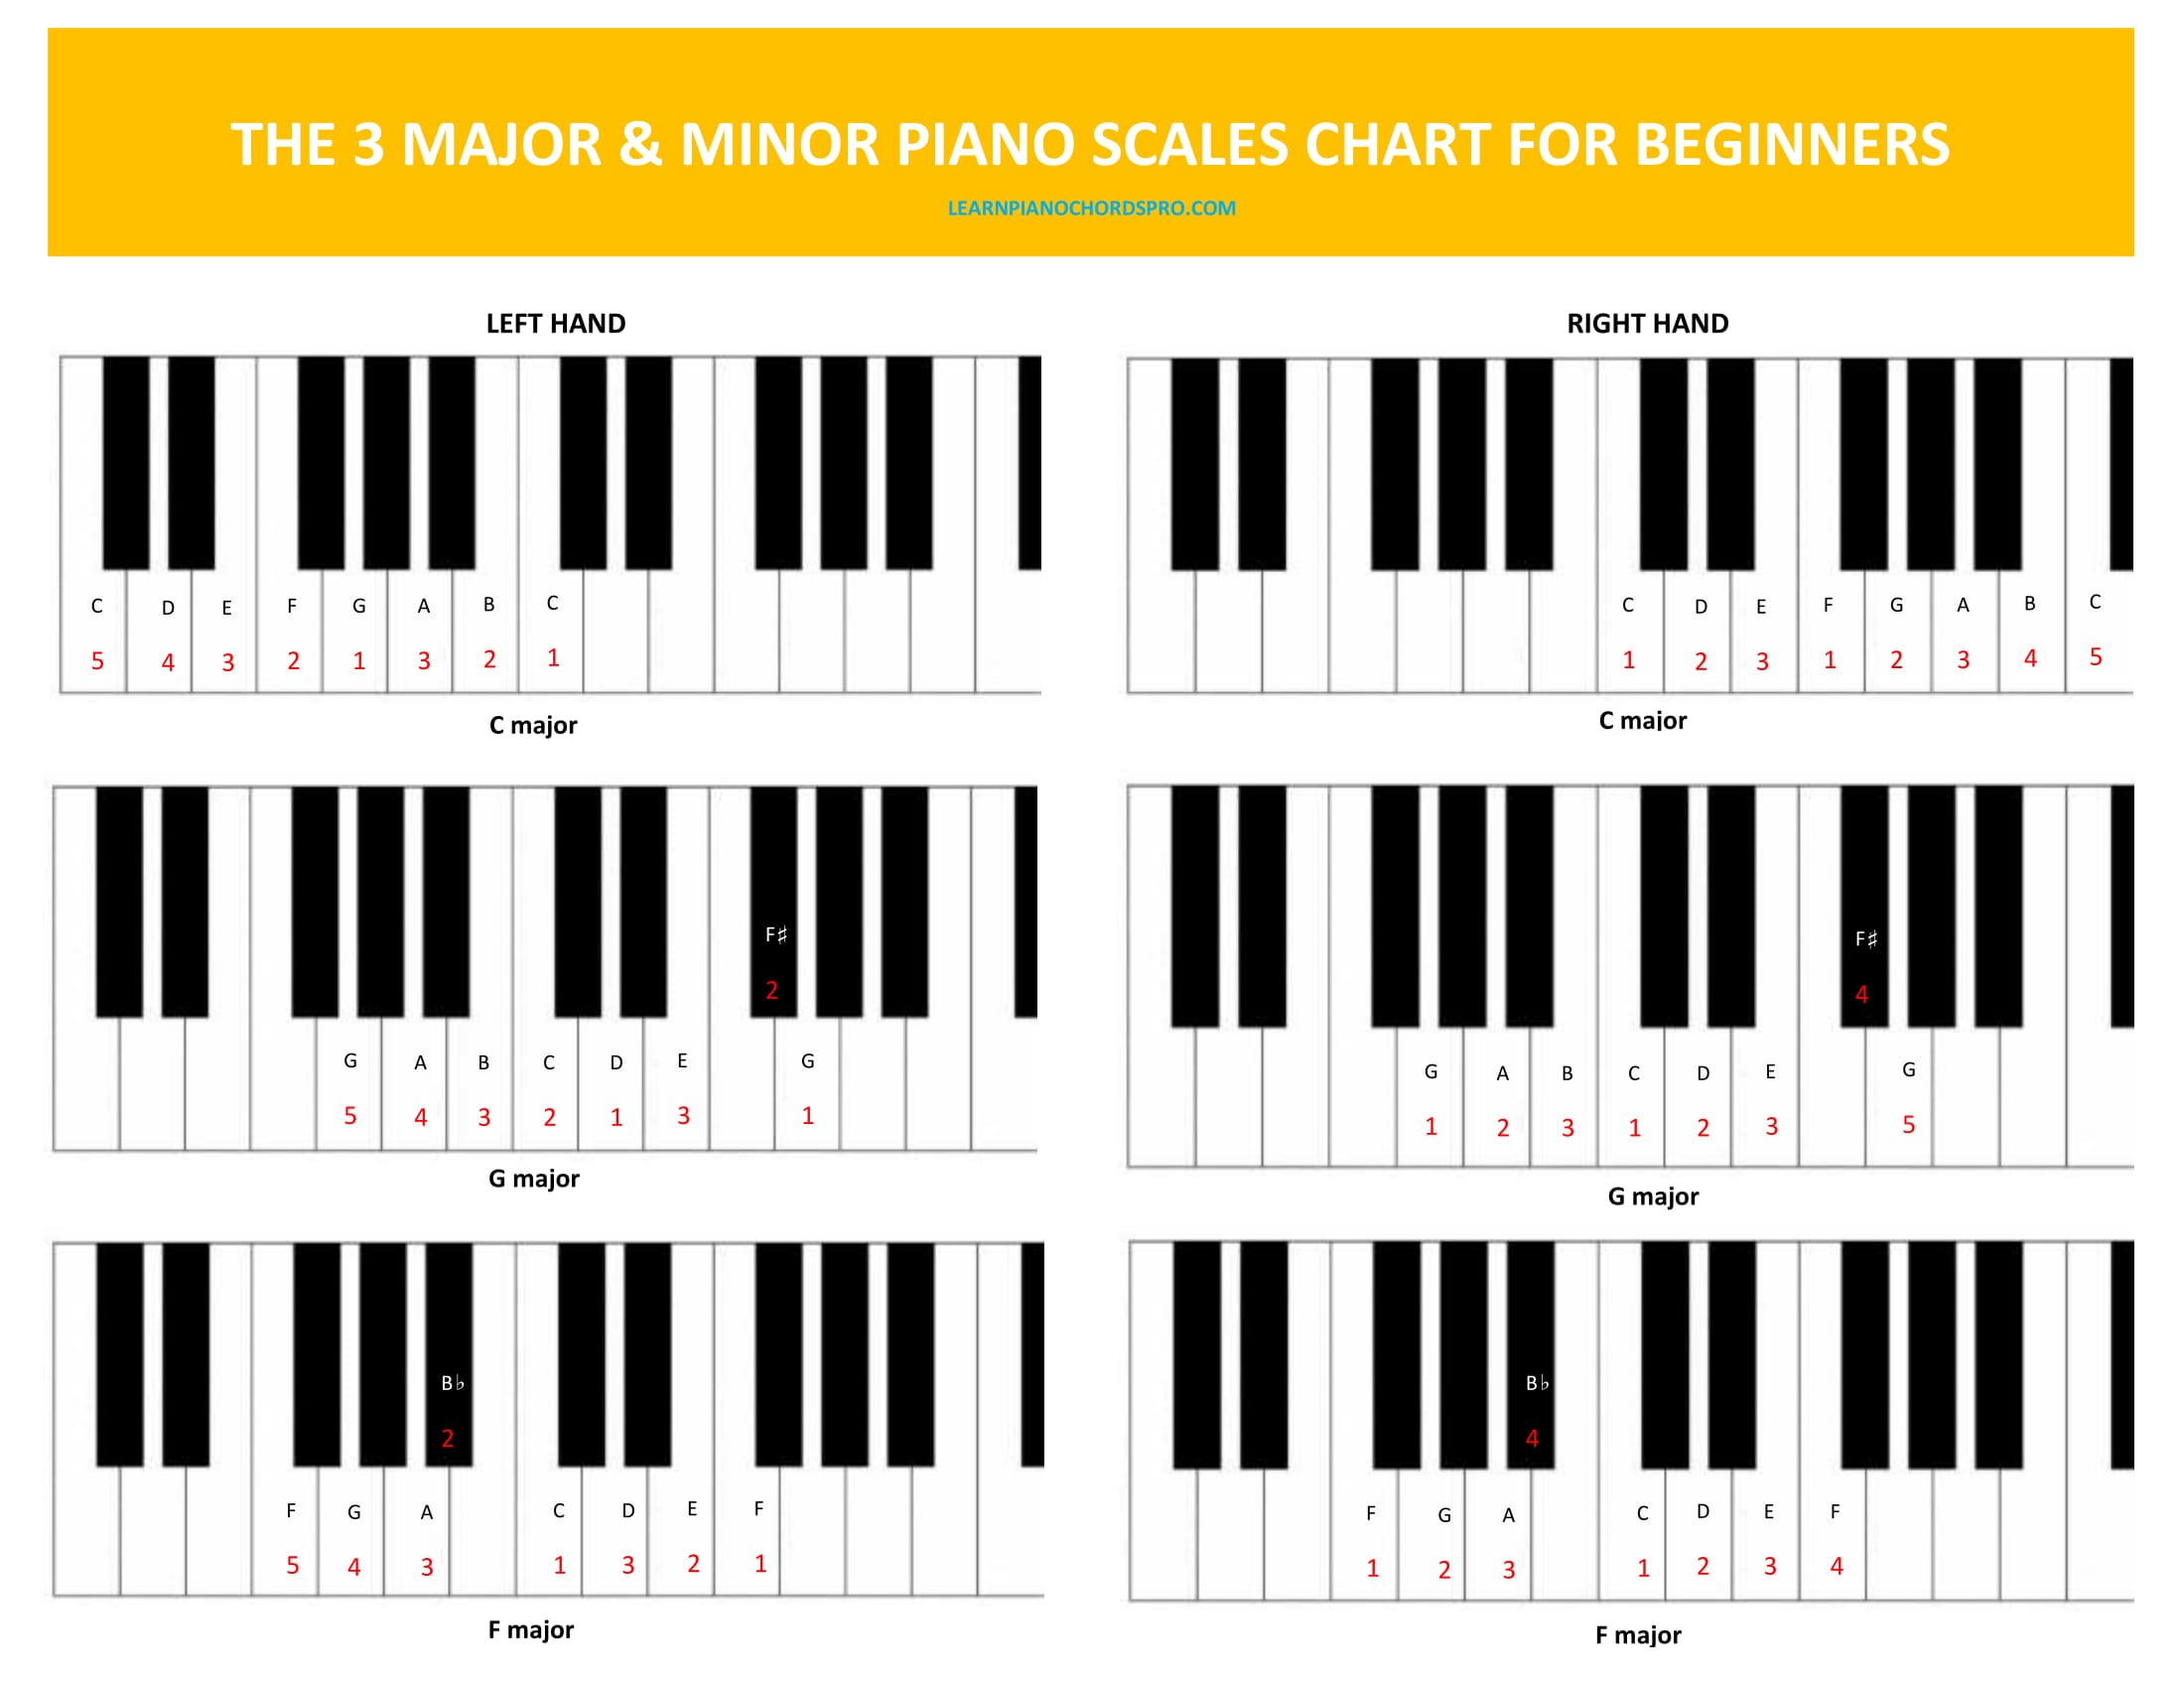 scale-chart-1-learn-piano-chords-pro